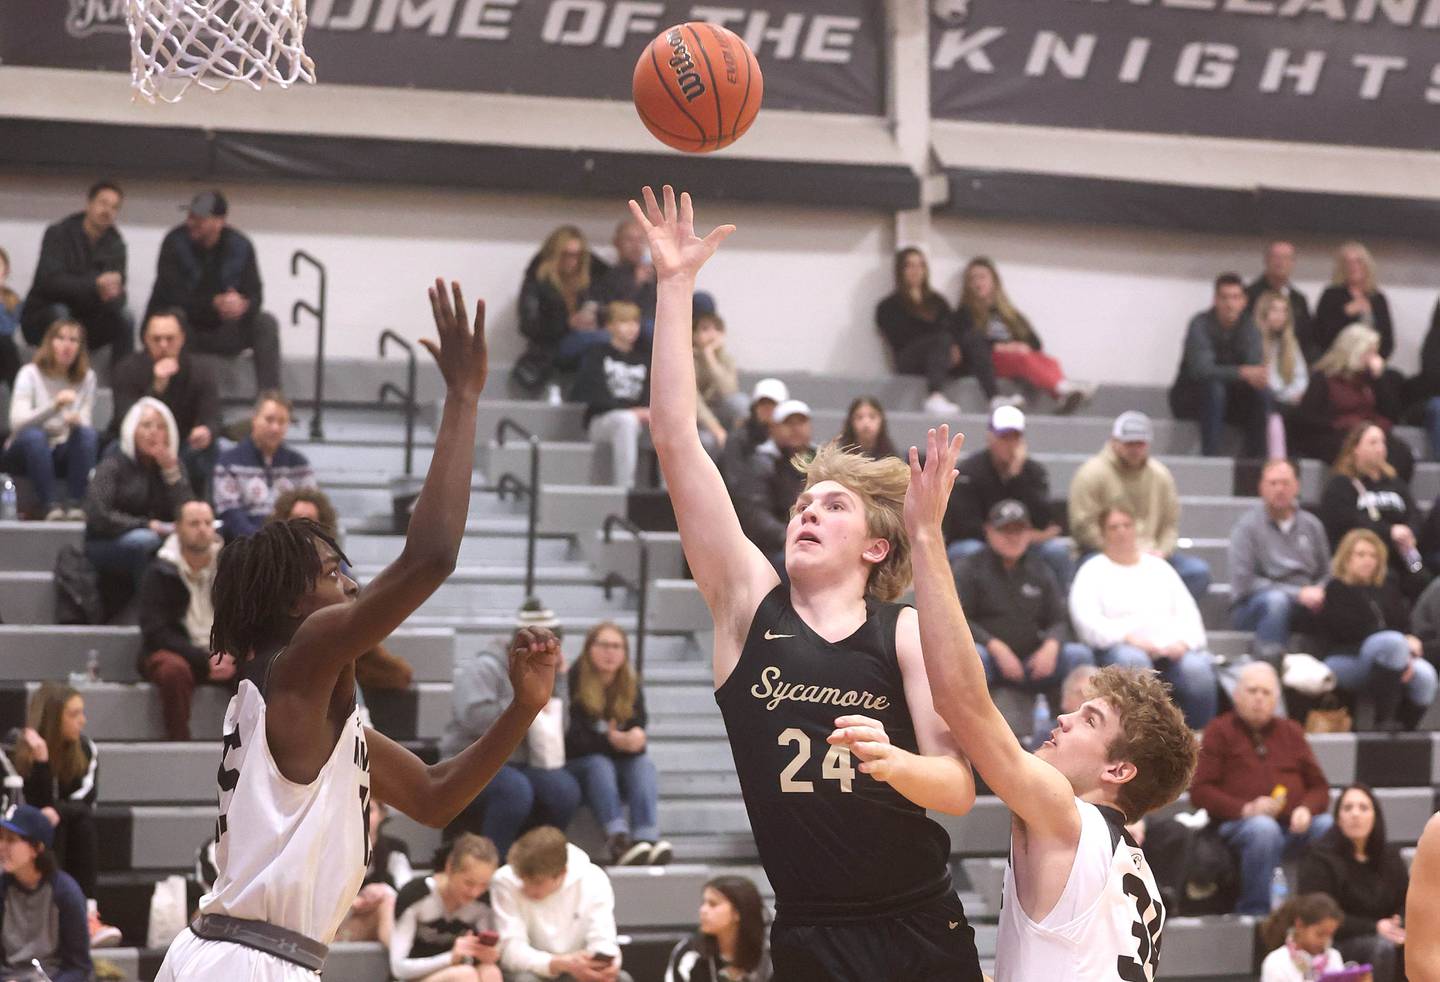 Sycamore's Lucas Winburn gets up a shot between Kaneland's Freddy Hassan and Parker Violett Friday, Jan. 6, 2023, during their game at Kaneland High School in Maple Park.